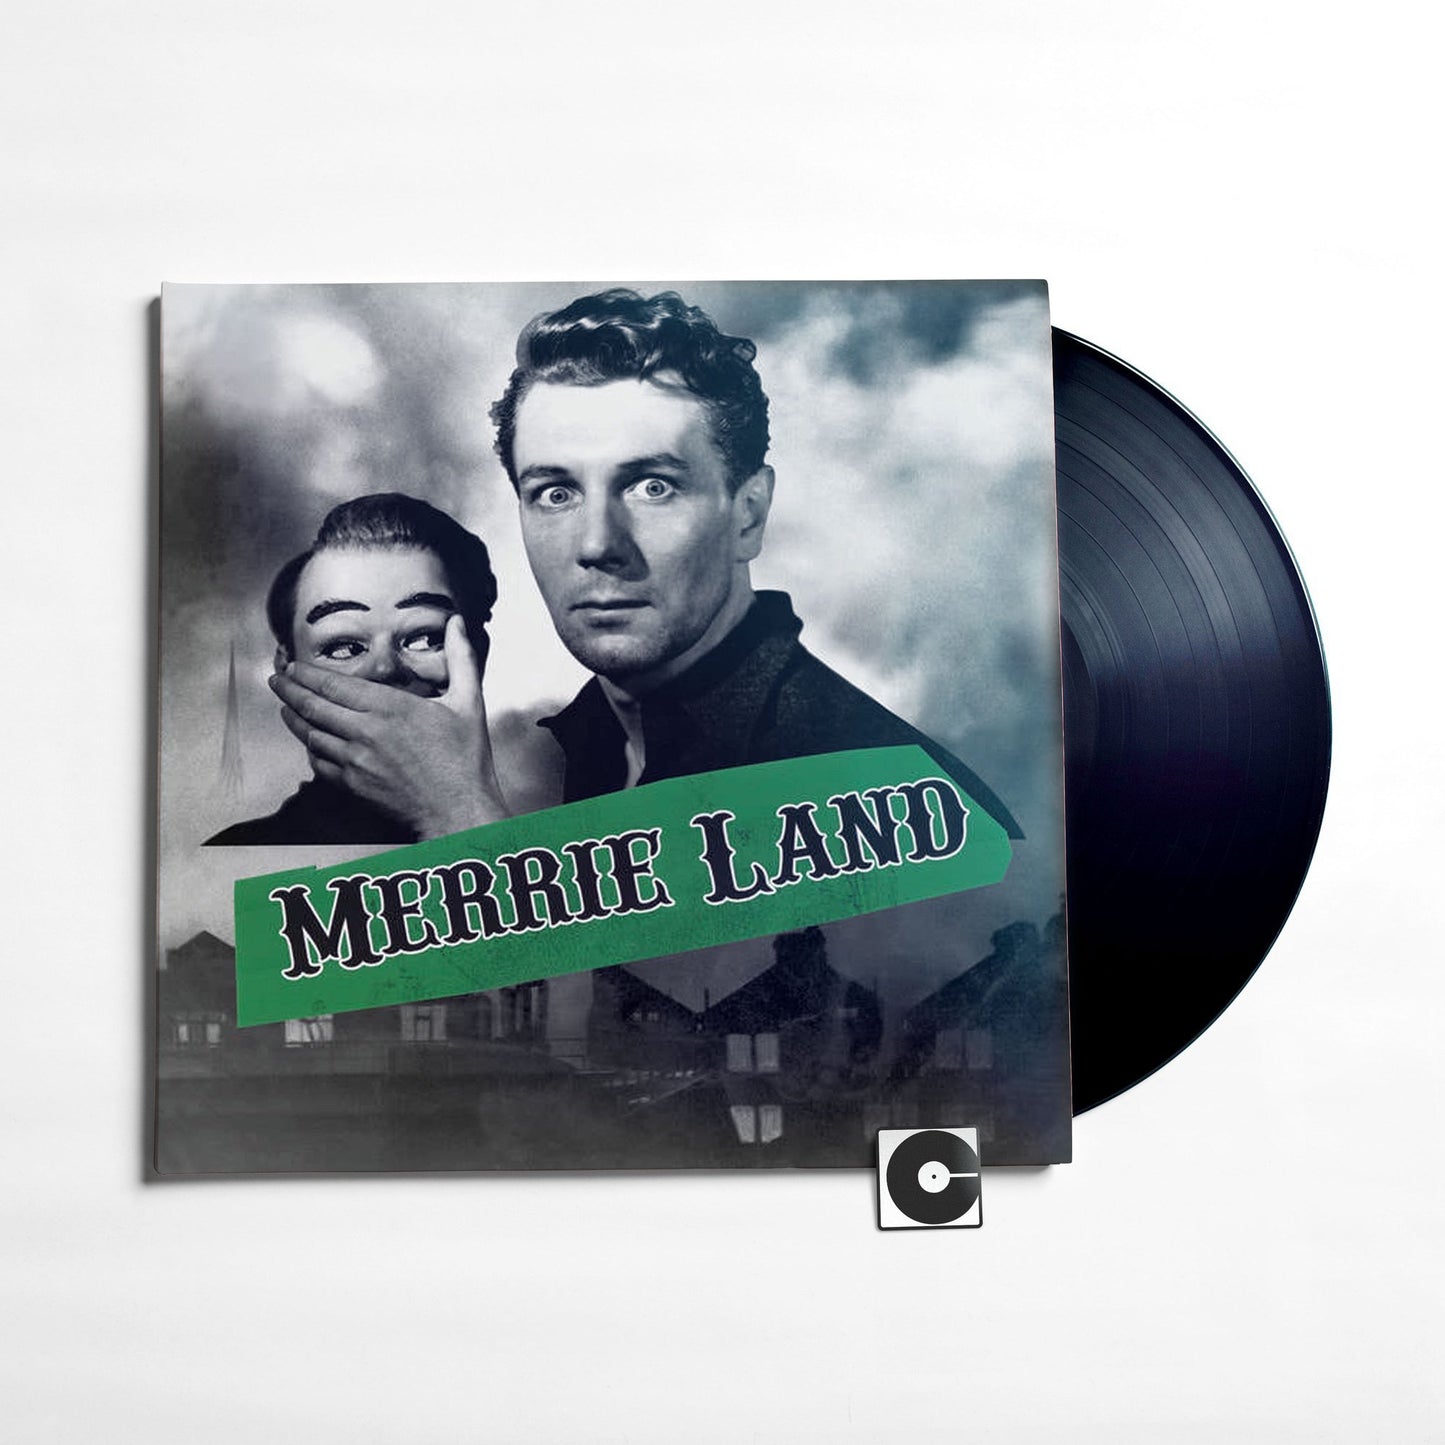 The Good, The Bad, And The Queen - "Merrie Land"